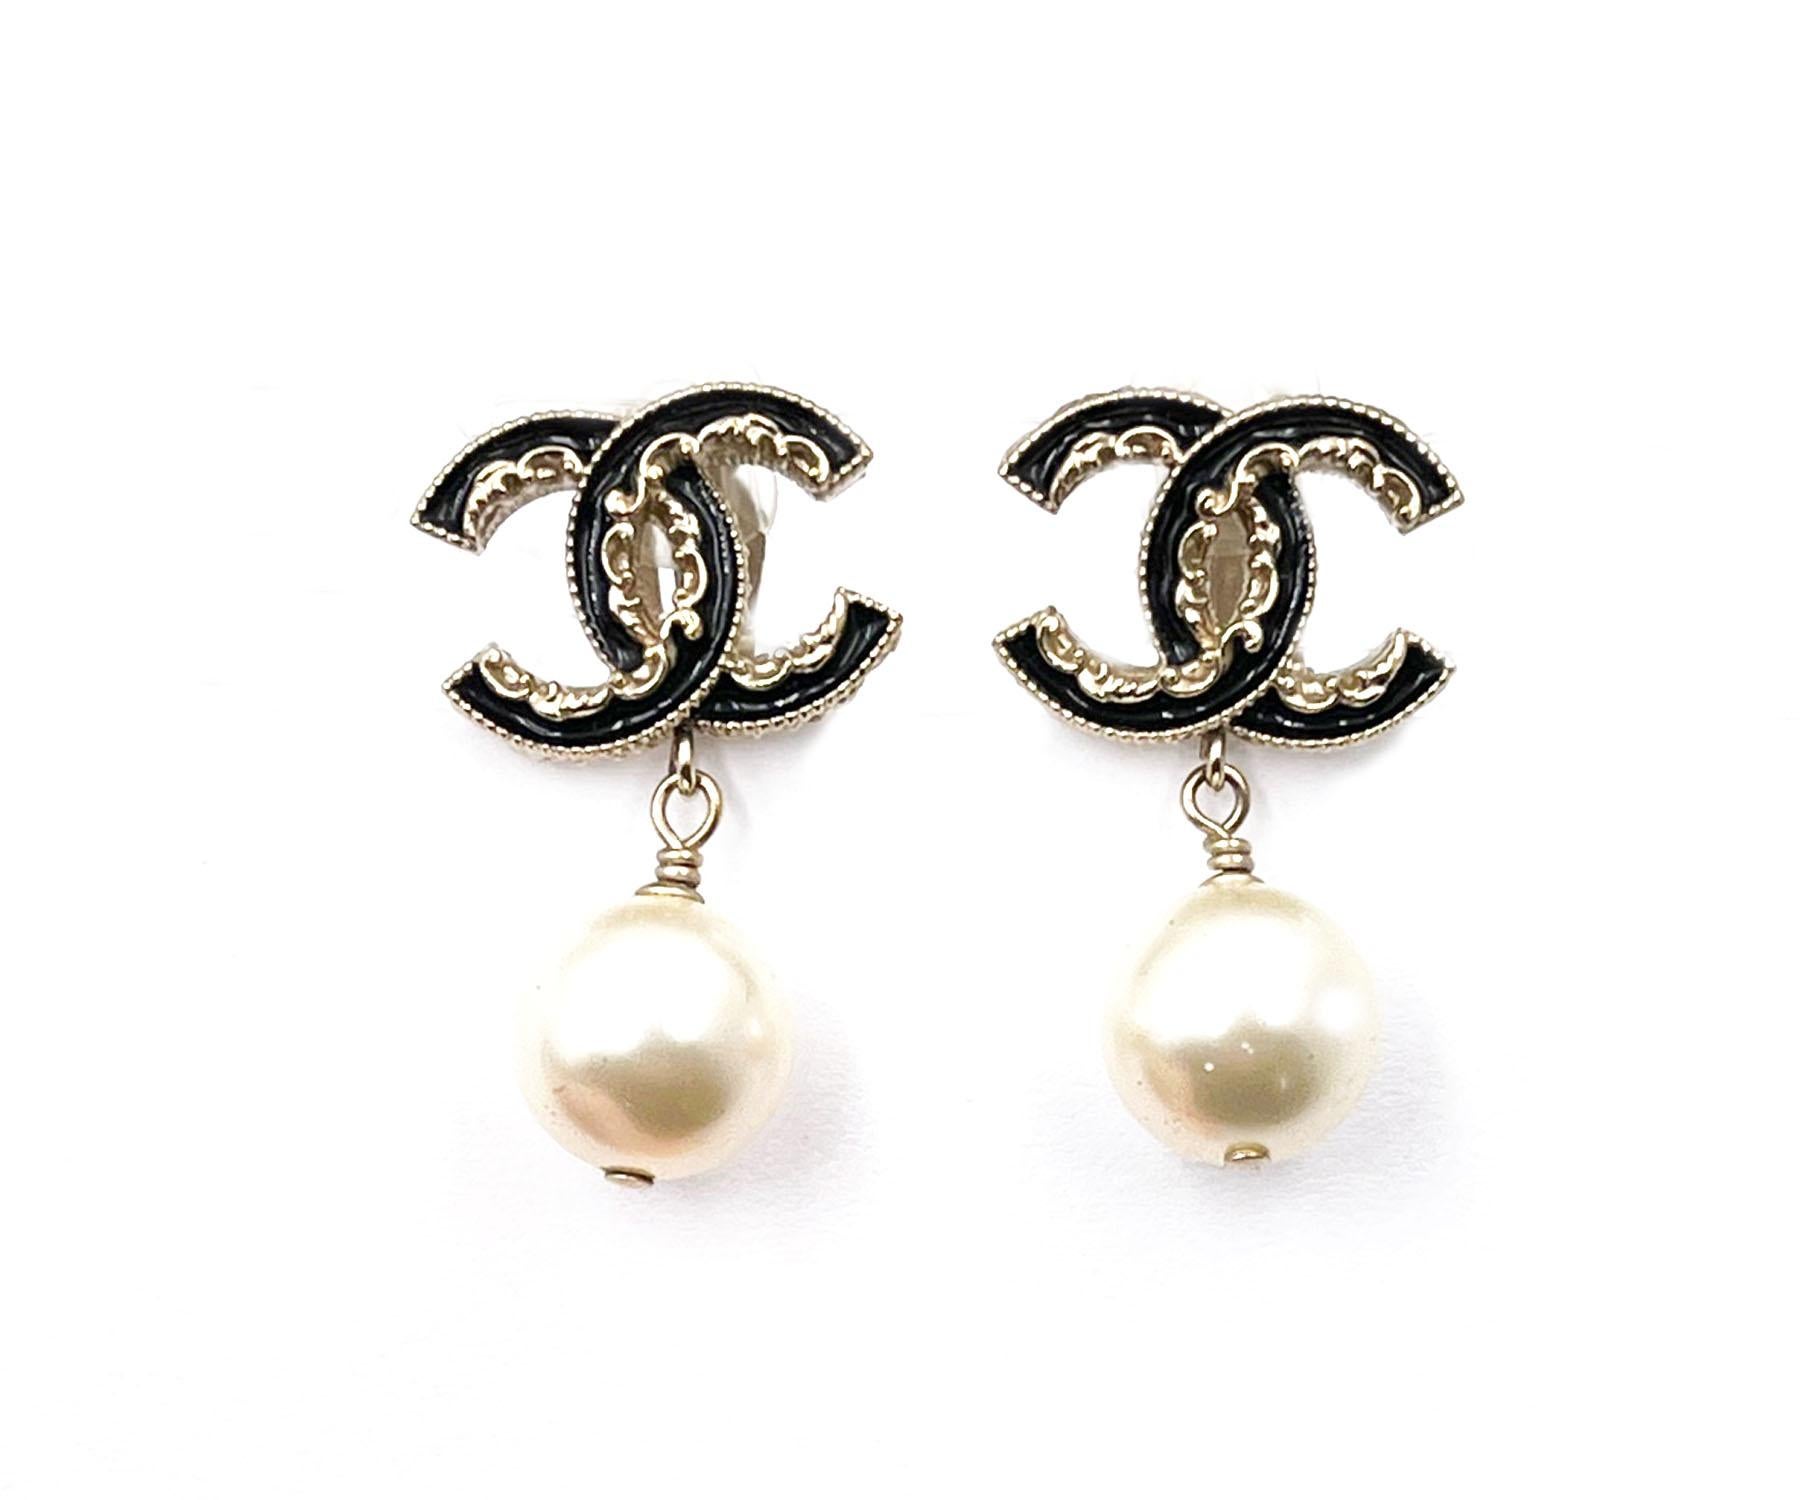 Chanel Gold CC Black Ruffle Pearl Dangle Clip on Earrings

* Marked 14
* Made in Italy
*Comes with the original box and pouch

- It is approximately 0.8